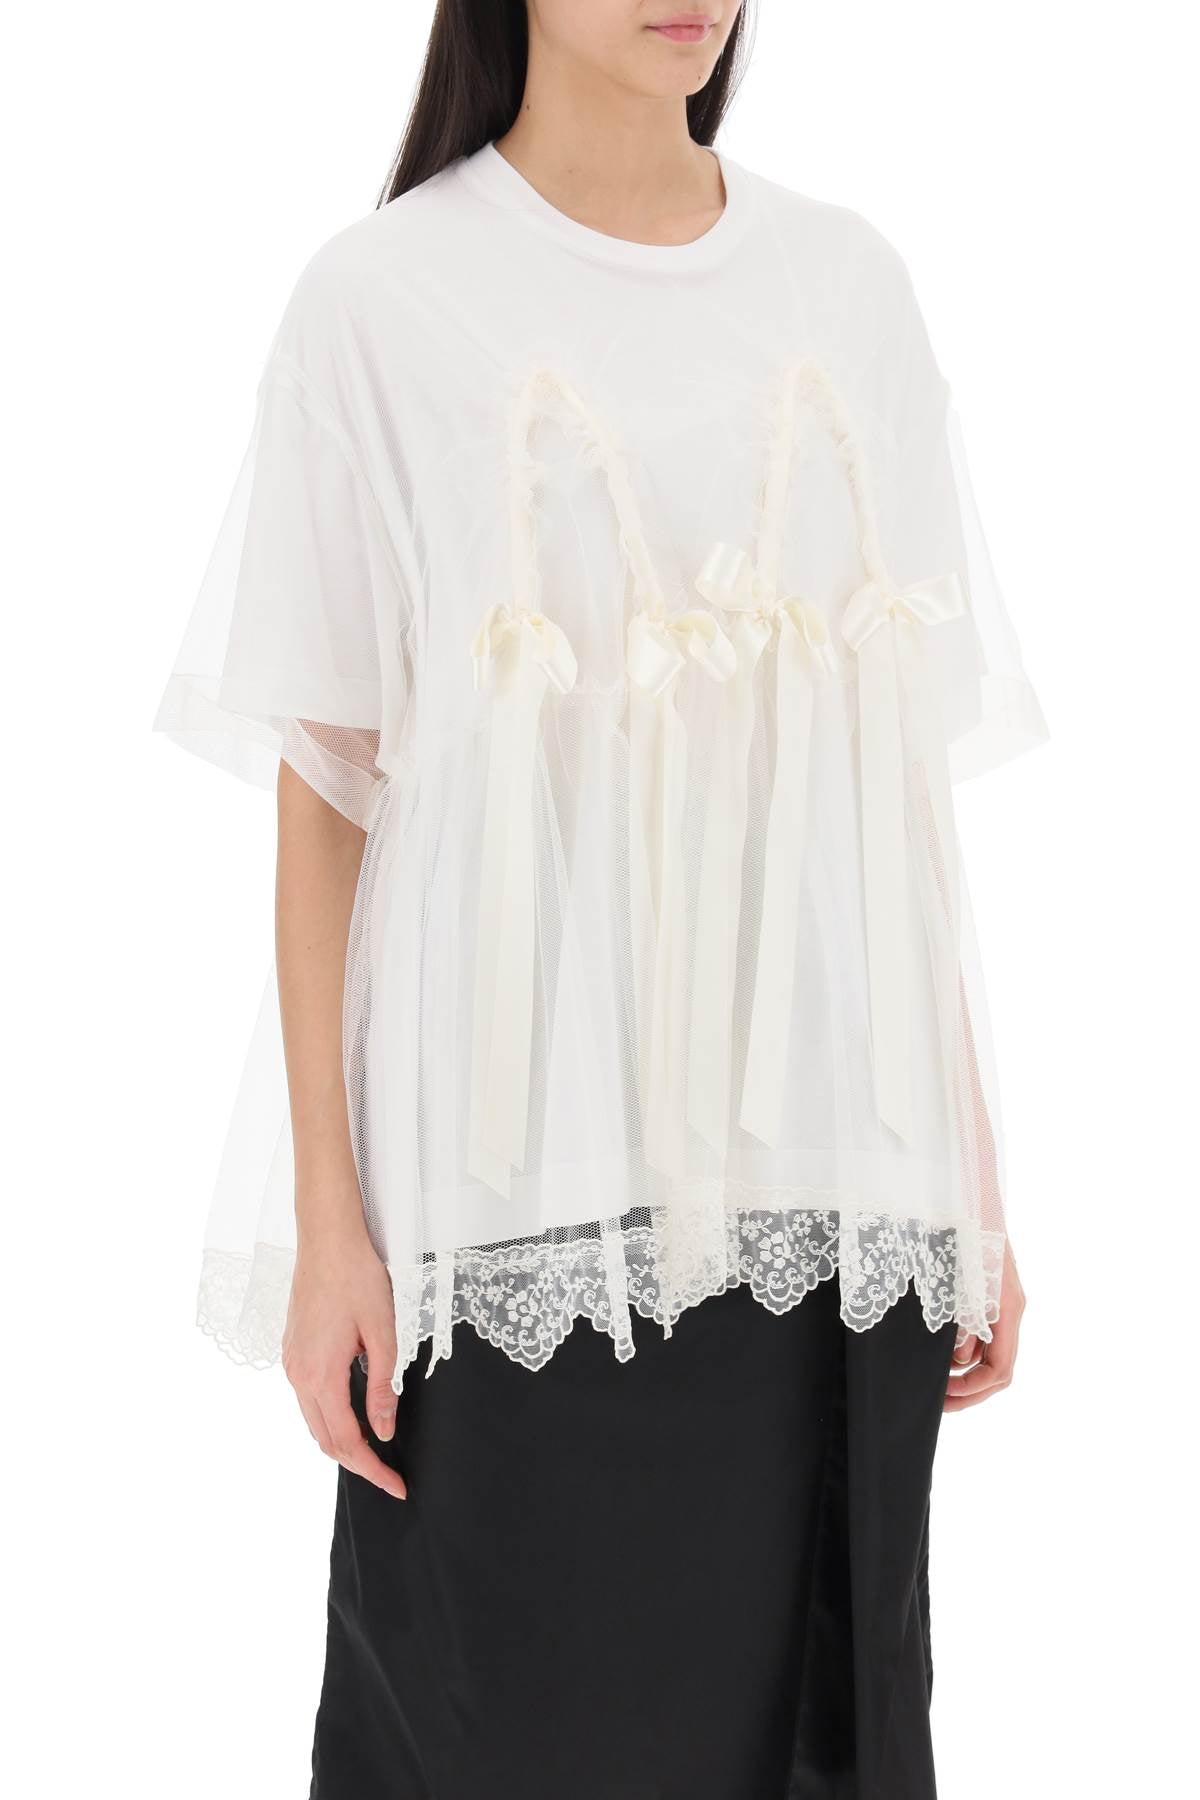 Simone rocha tulle top with lace and bows-1